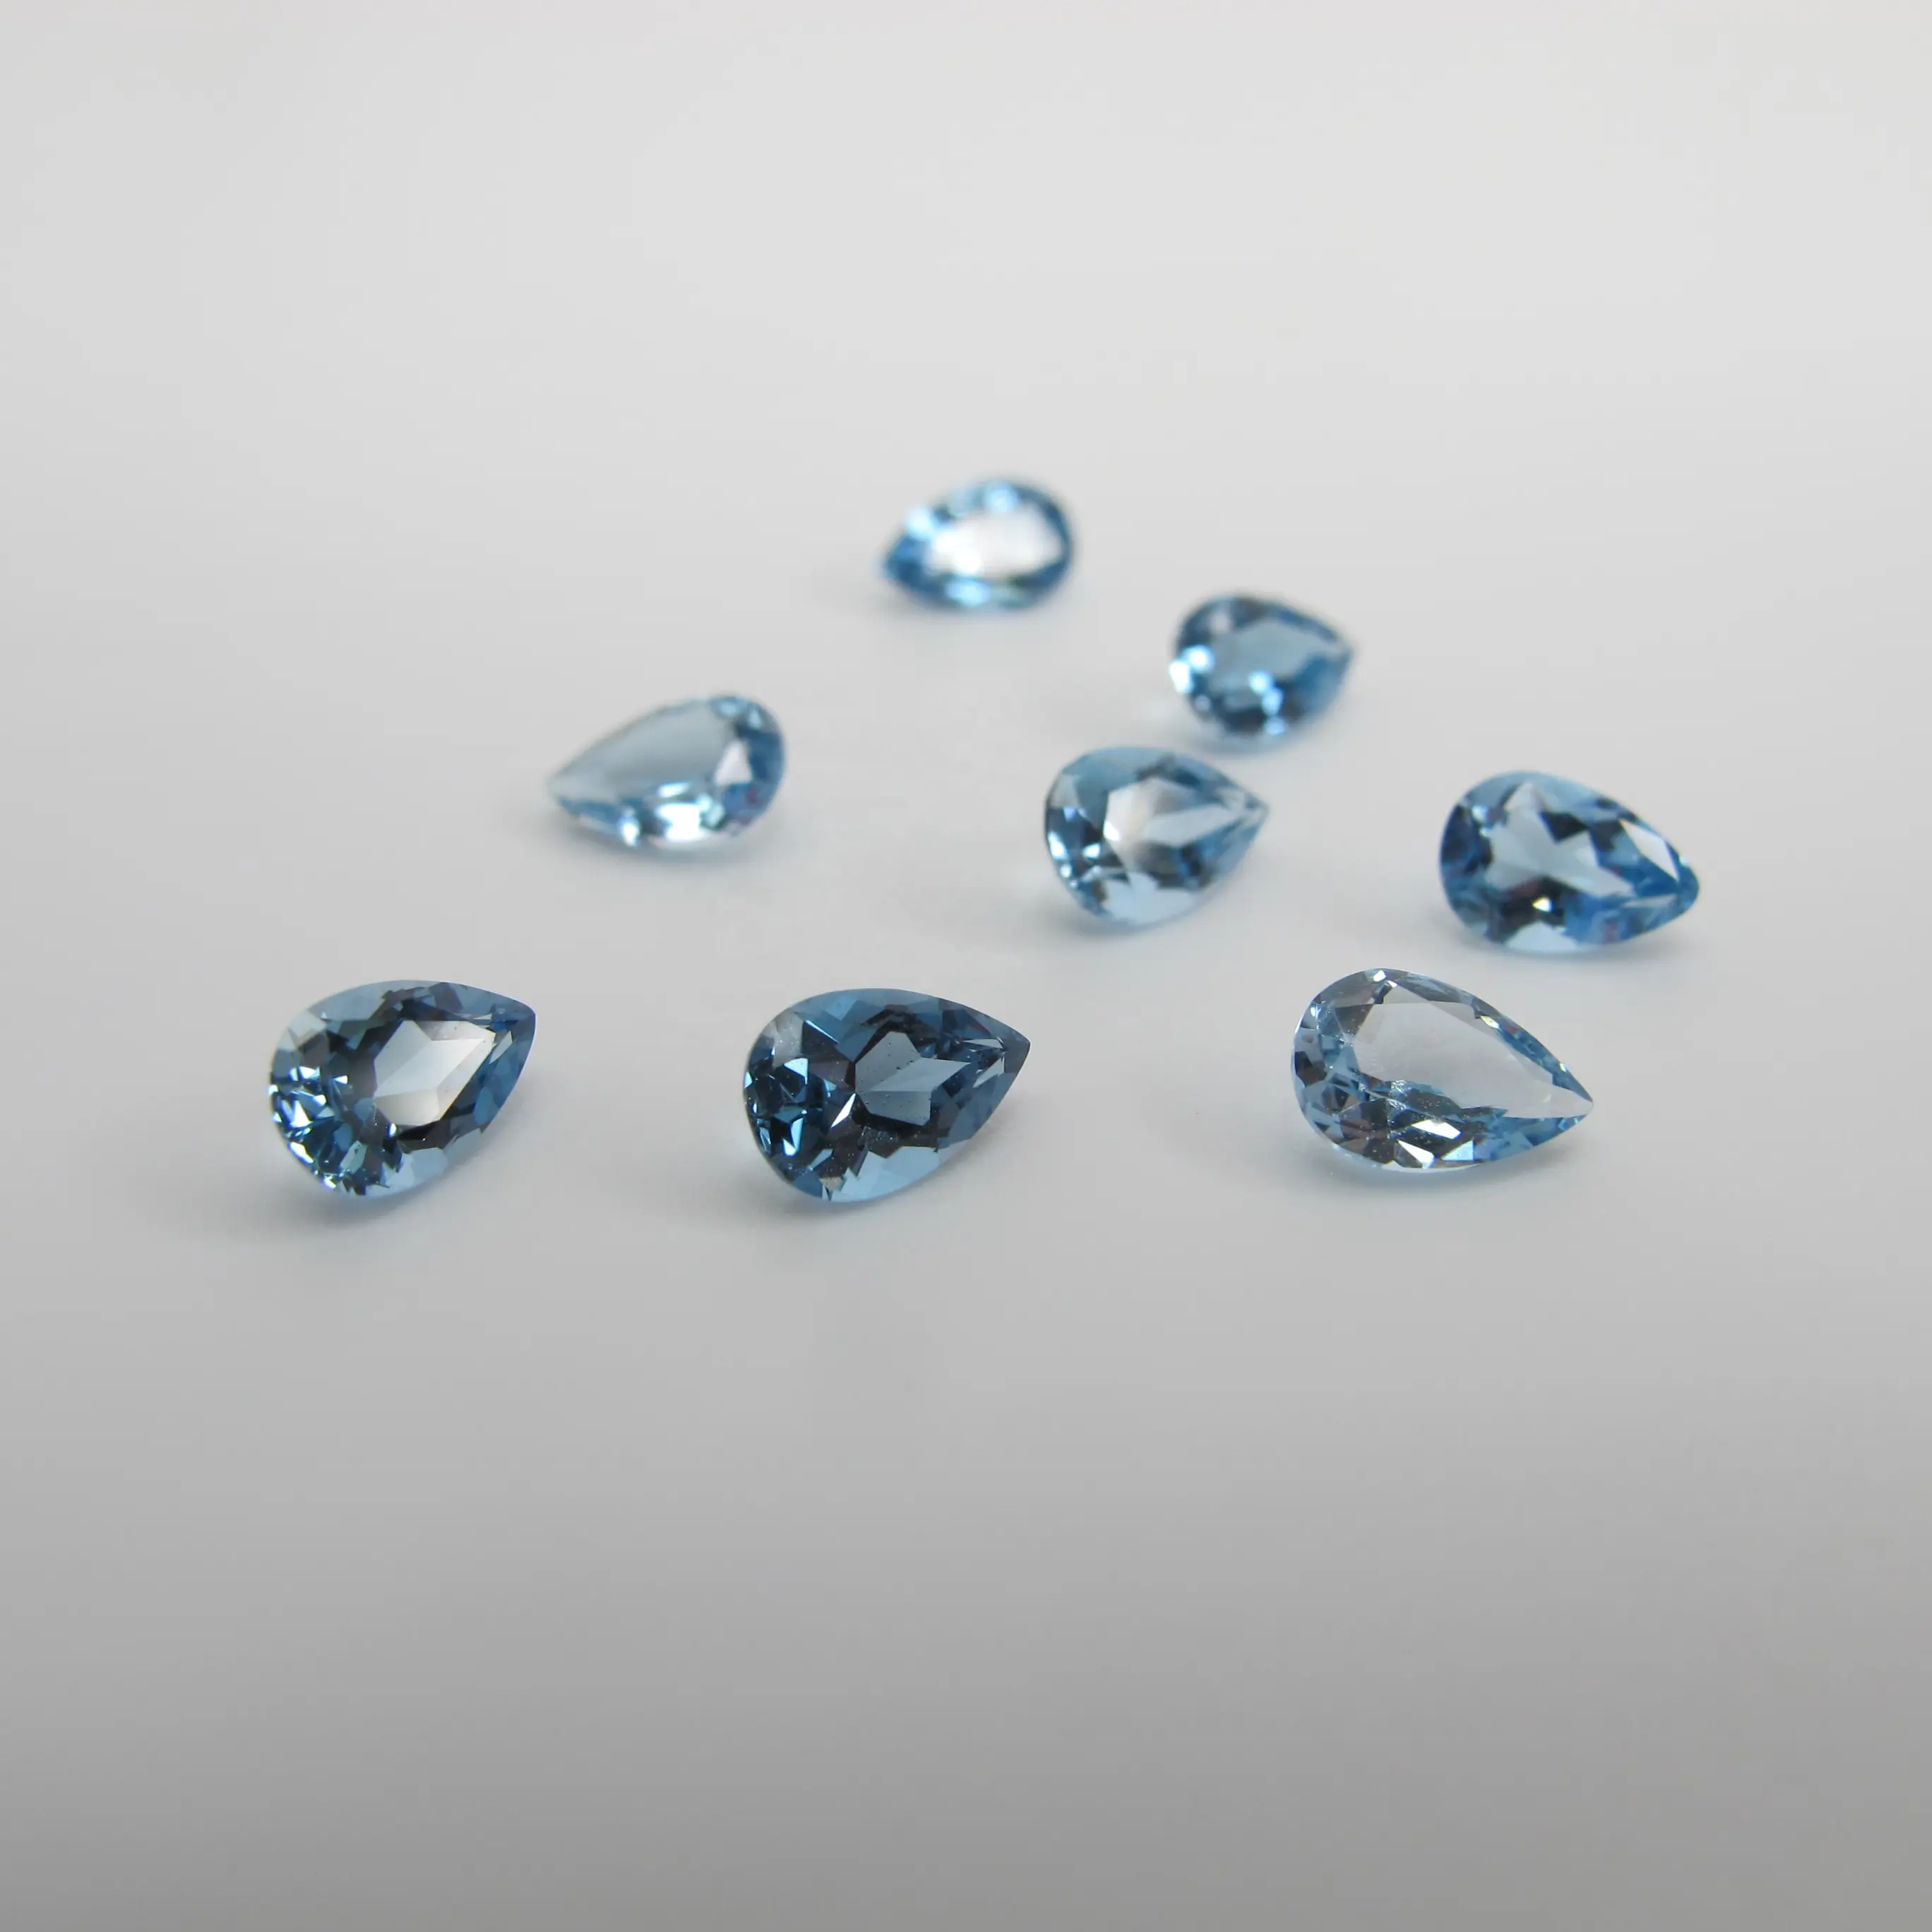 Abiding 4*6 Mm Pear Shape Rough Stone Faceted Cut Natural London Blue Topaz Gemstone Loose Beads For Jewelry Making